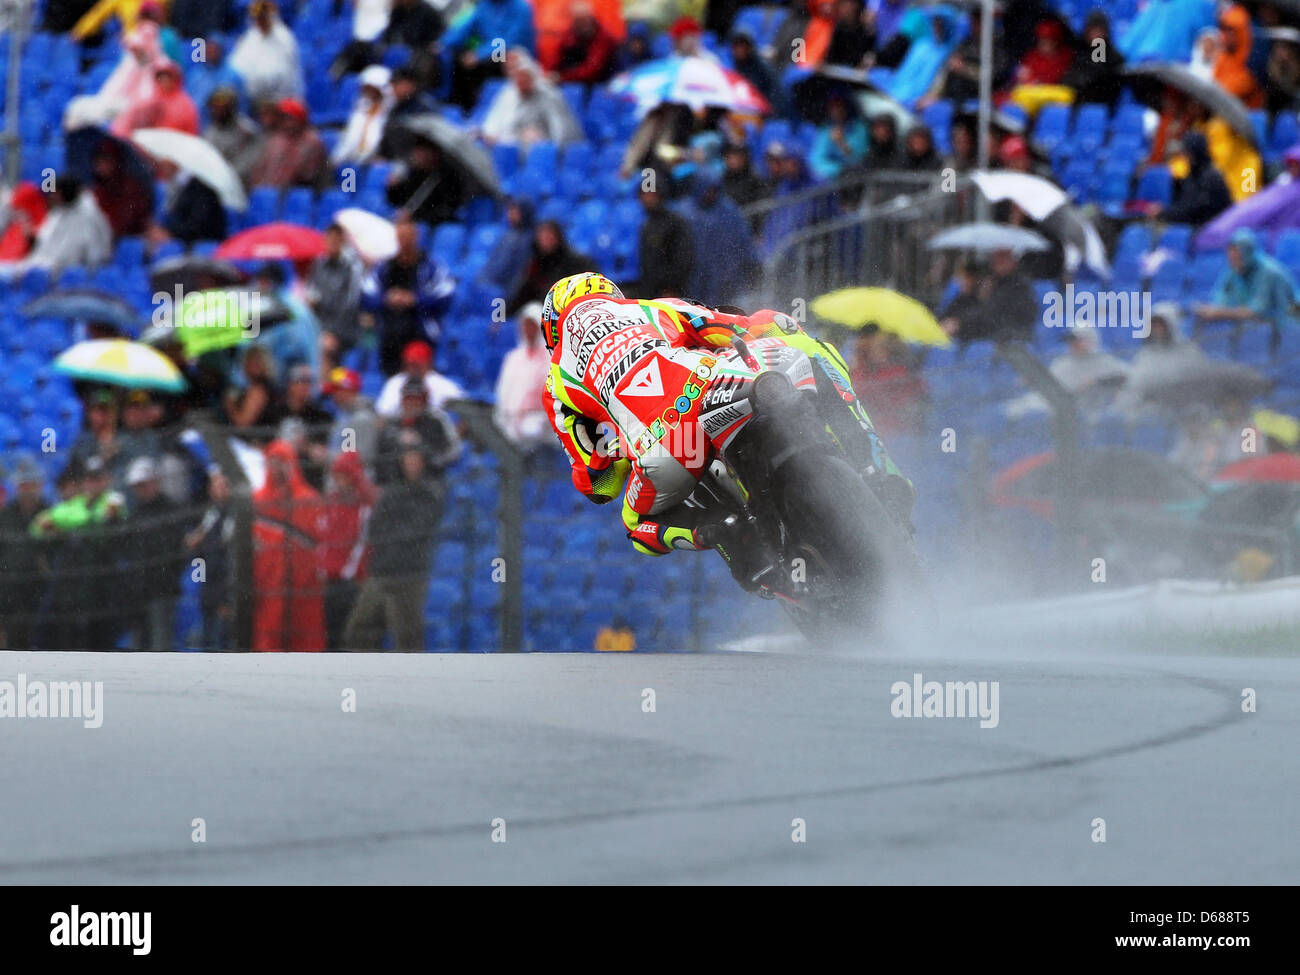 Italian MotoGP driver Valentino Rossi of Team Ducati during the qualifying for the German Grand Prix on the racetrack at the Sachsenring in Hohenstein-Ernstthal, Germany, 07 July 2012.  Photo: JAN WOITAS Stock Photo